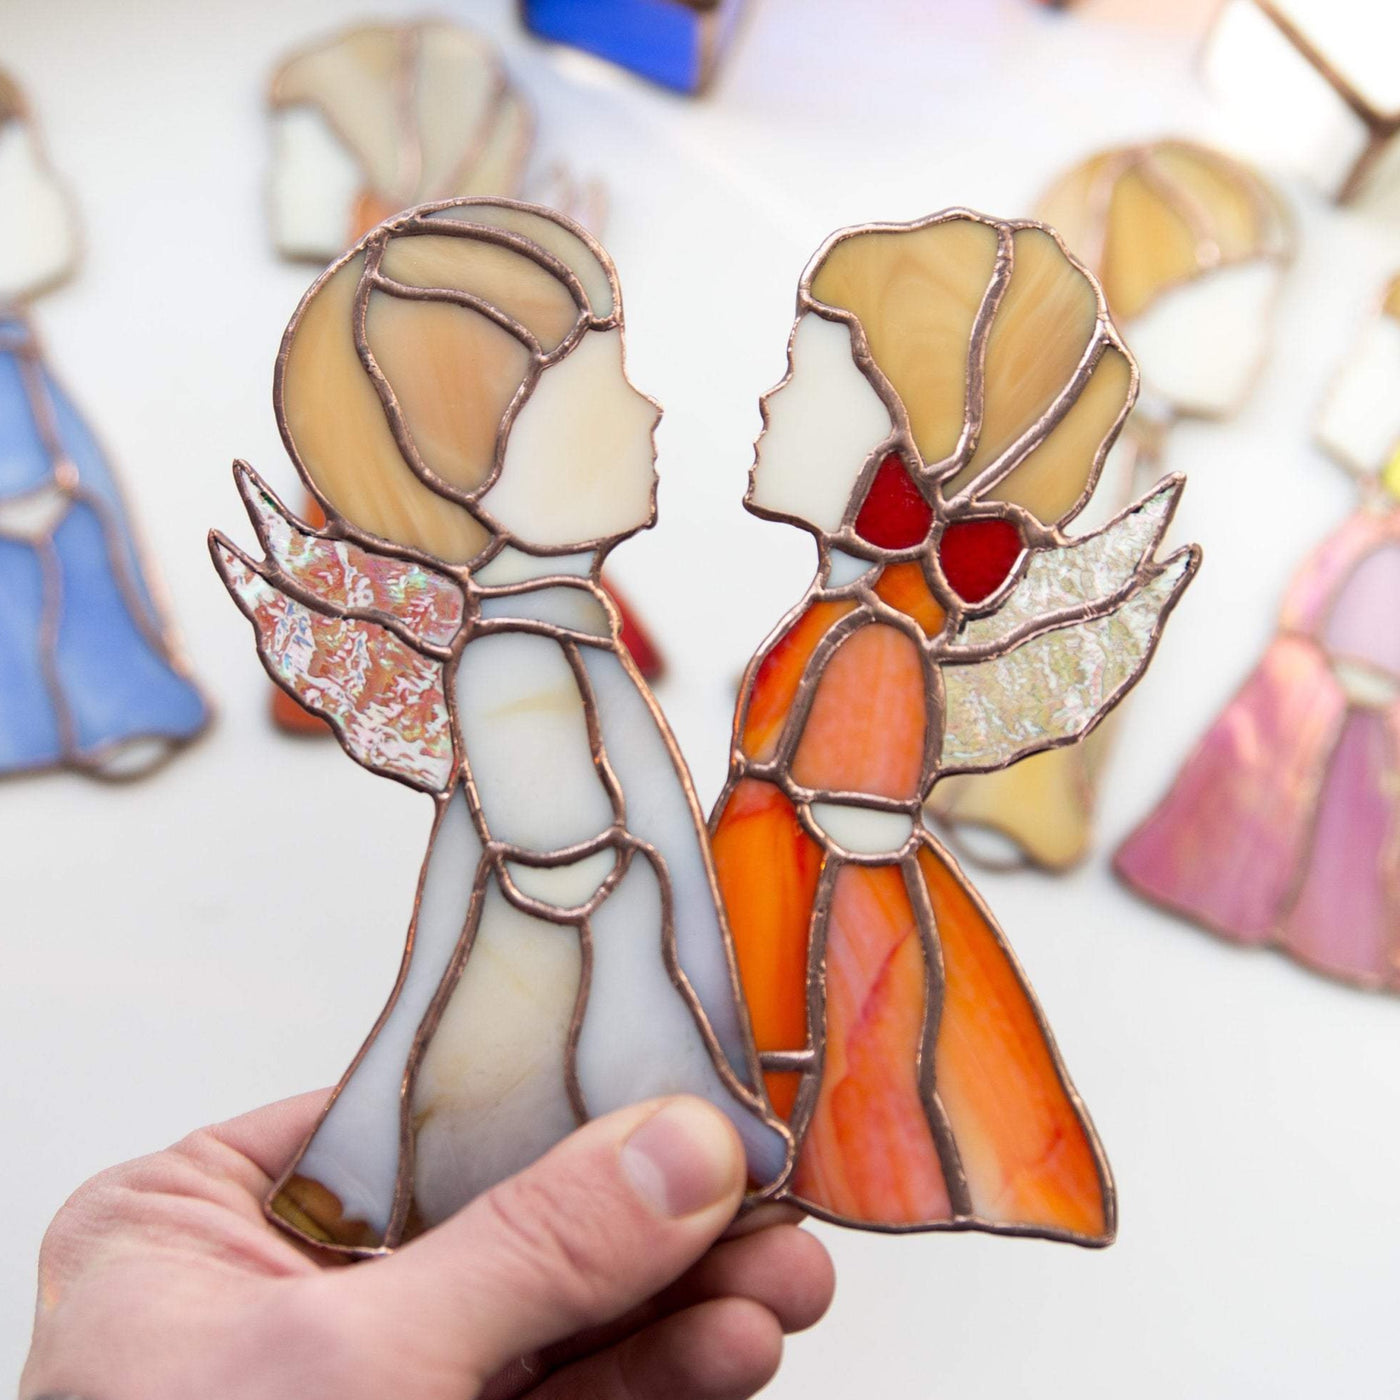 Window hangings of stained glass beige boy and red girl angels